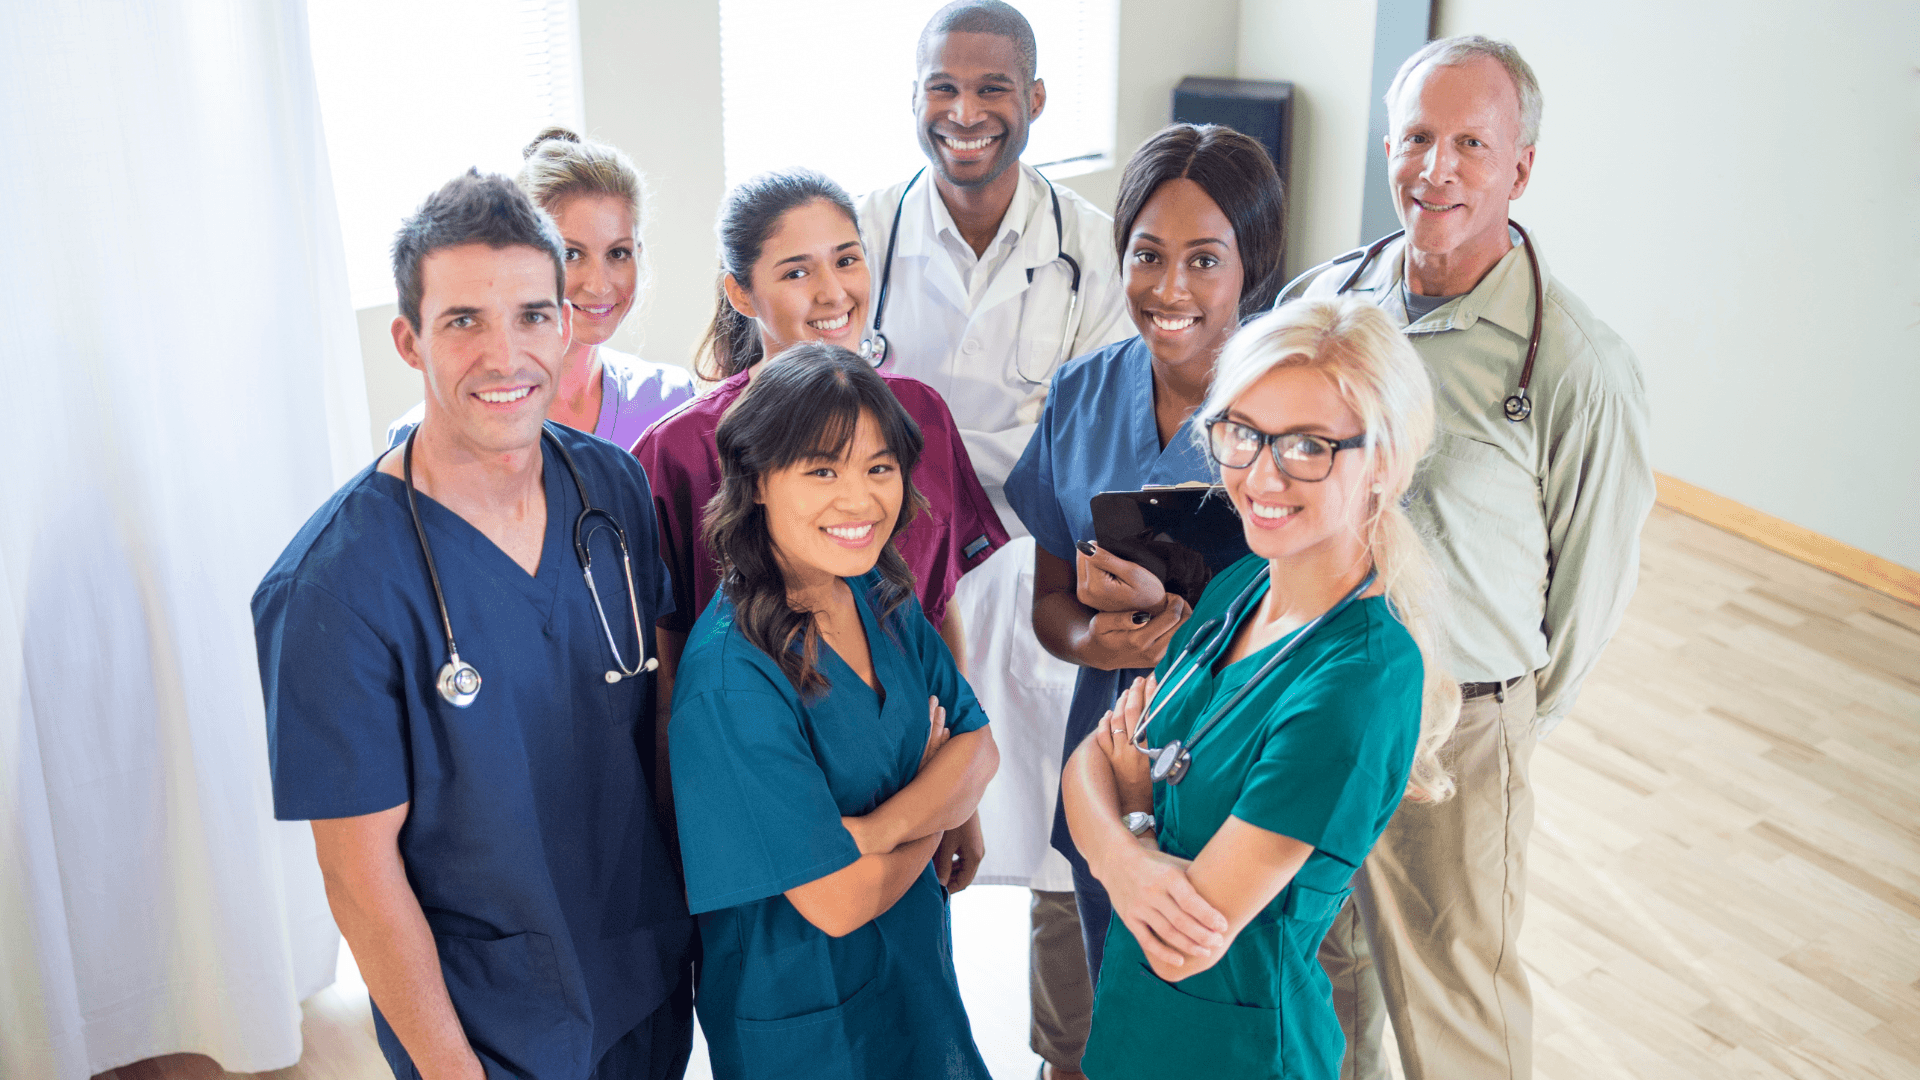 A Group Of Doctors And Nurses Standing Together